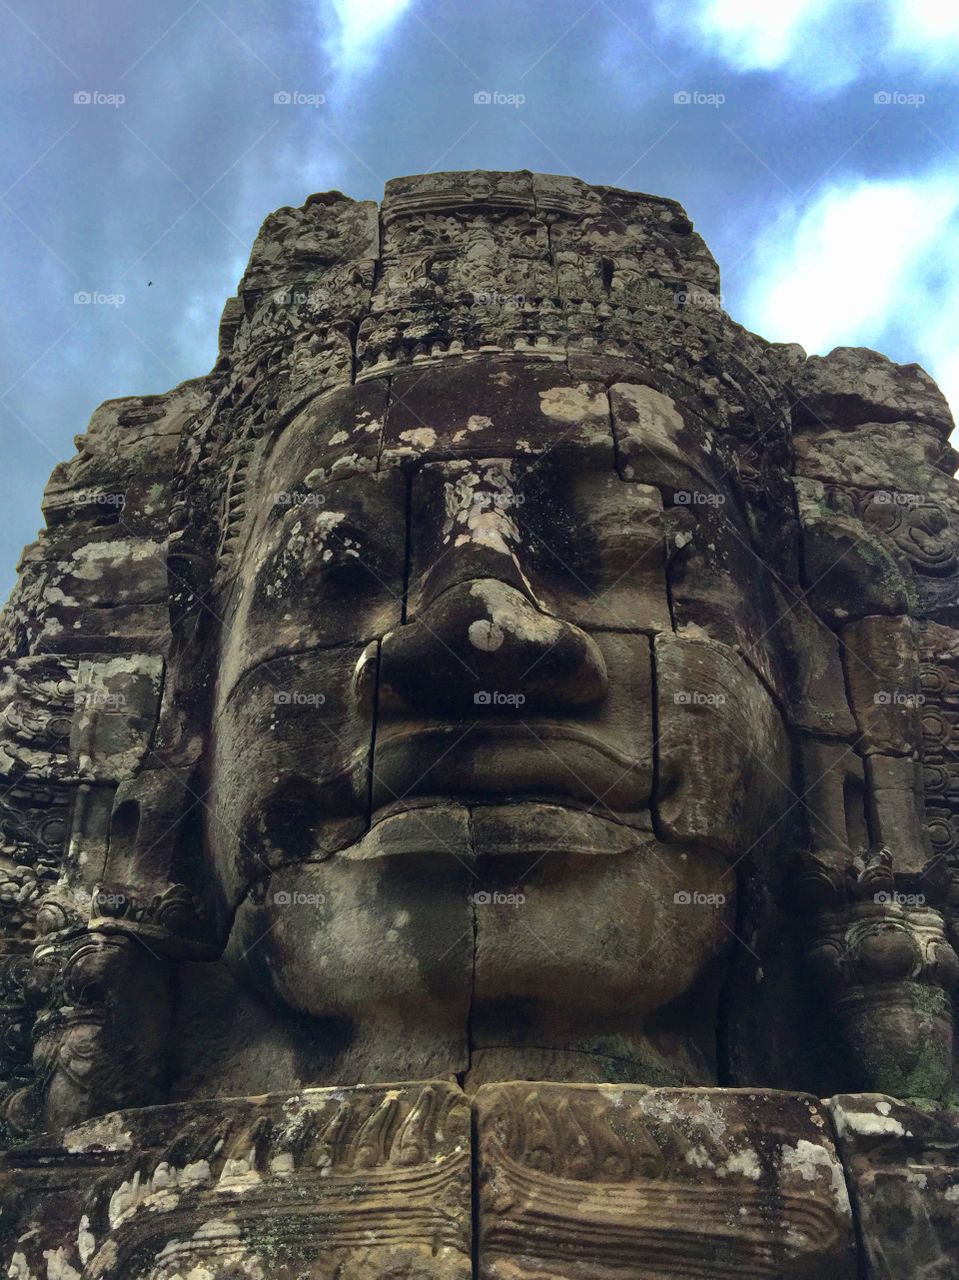 Face in a stone at the Bayon Temple in Angkor Archaeological Site 